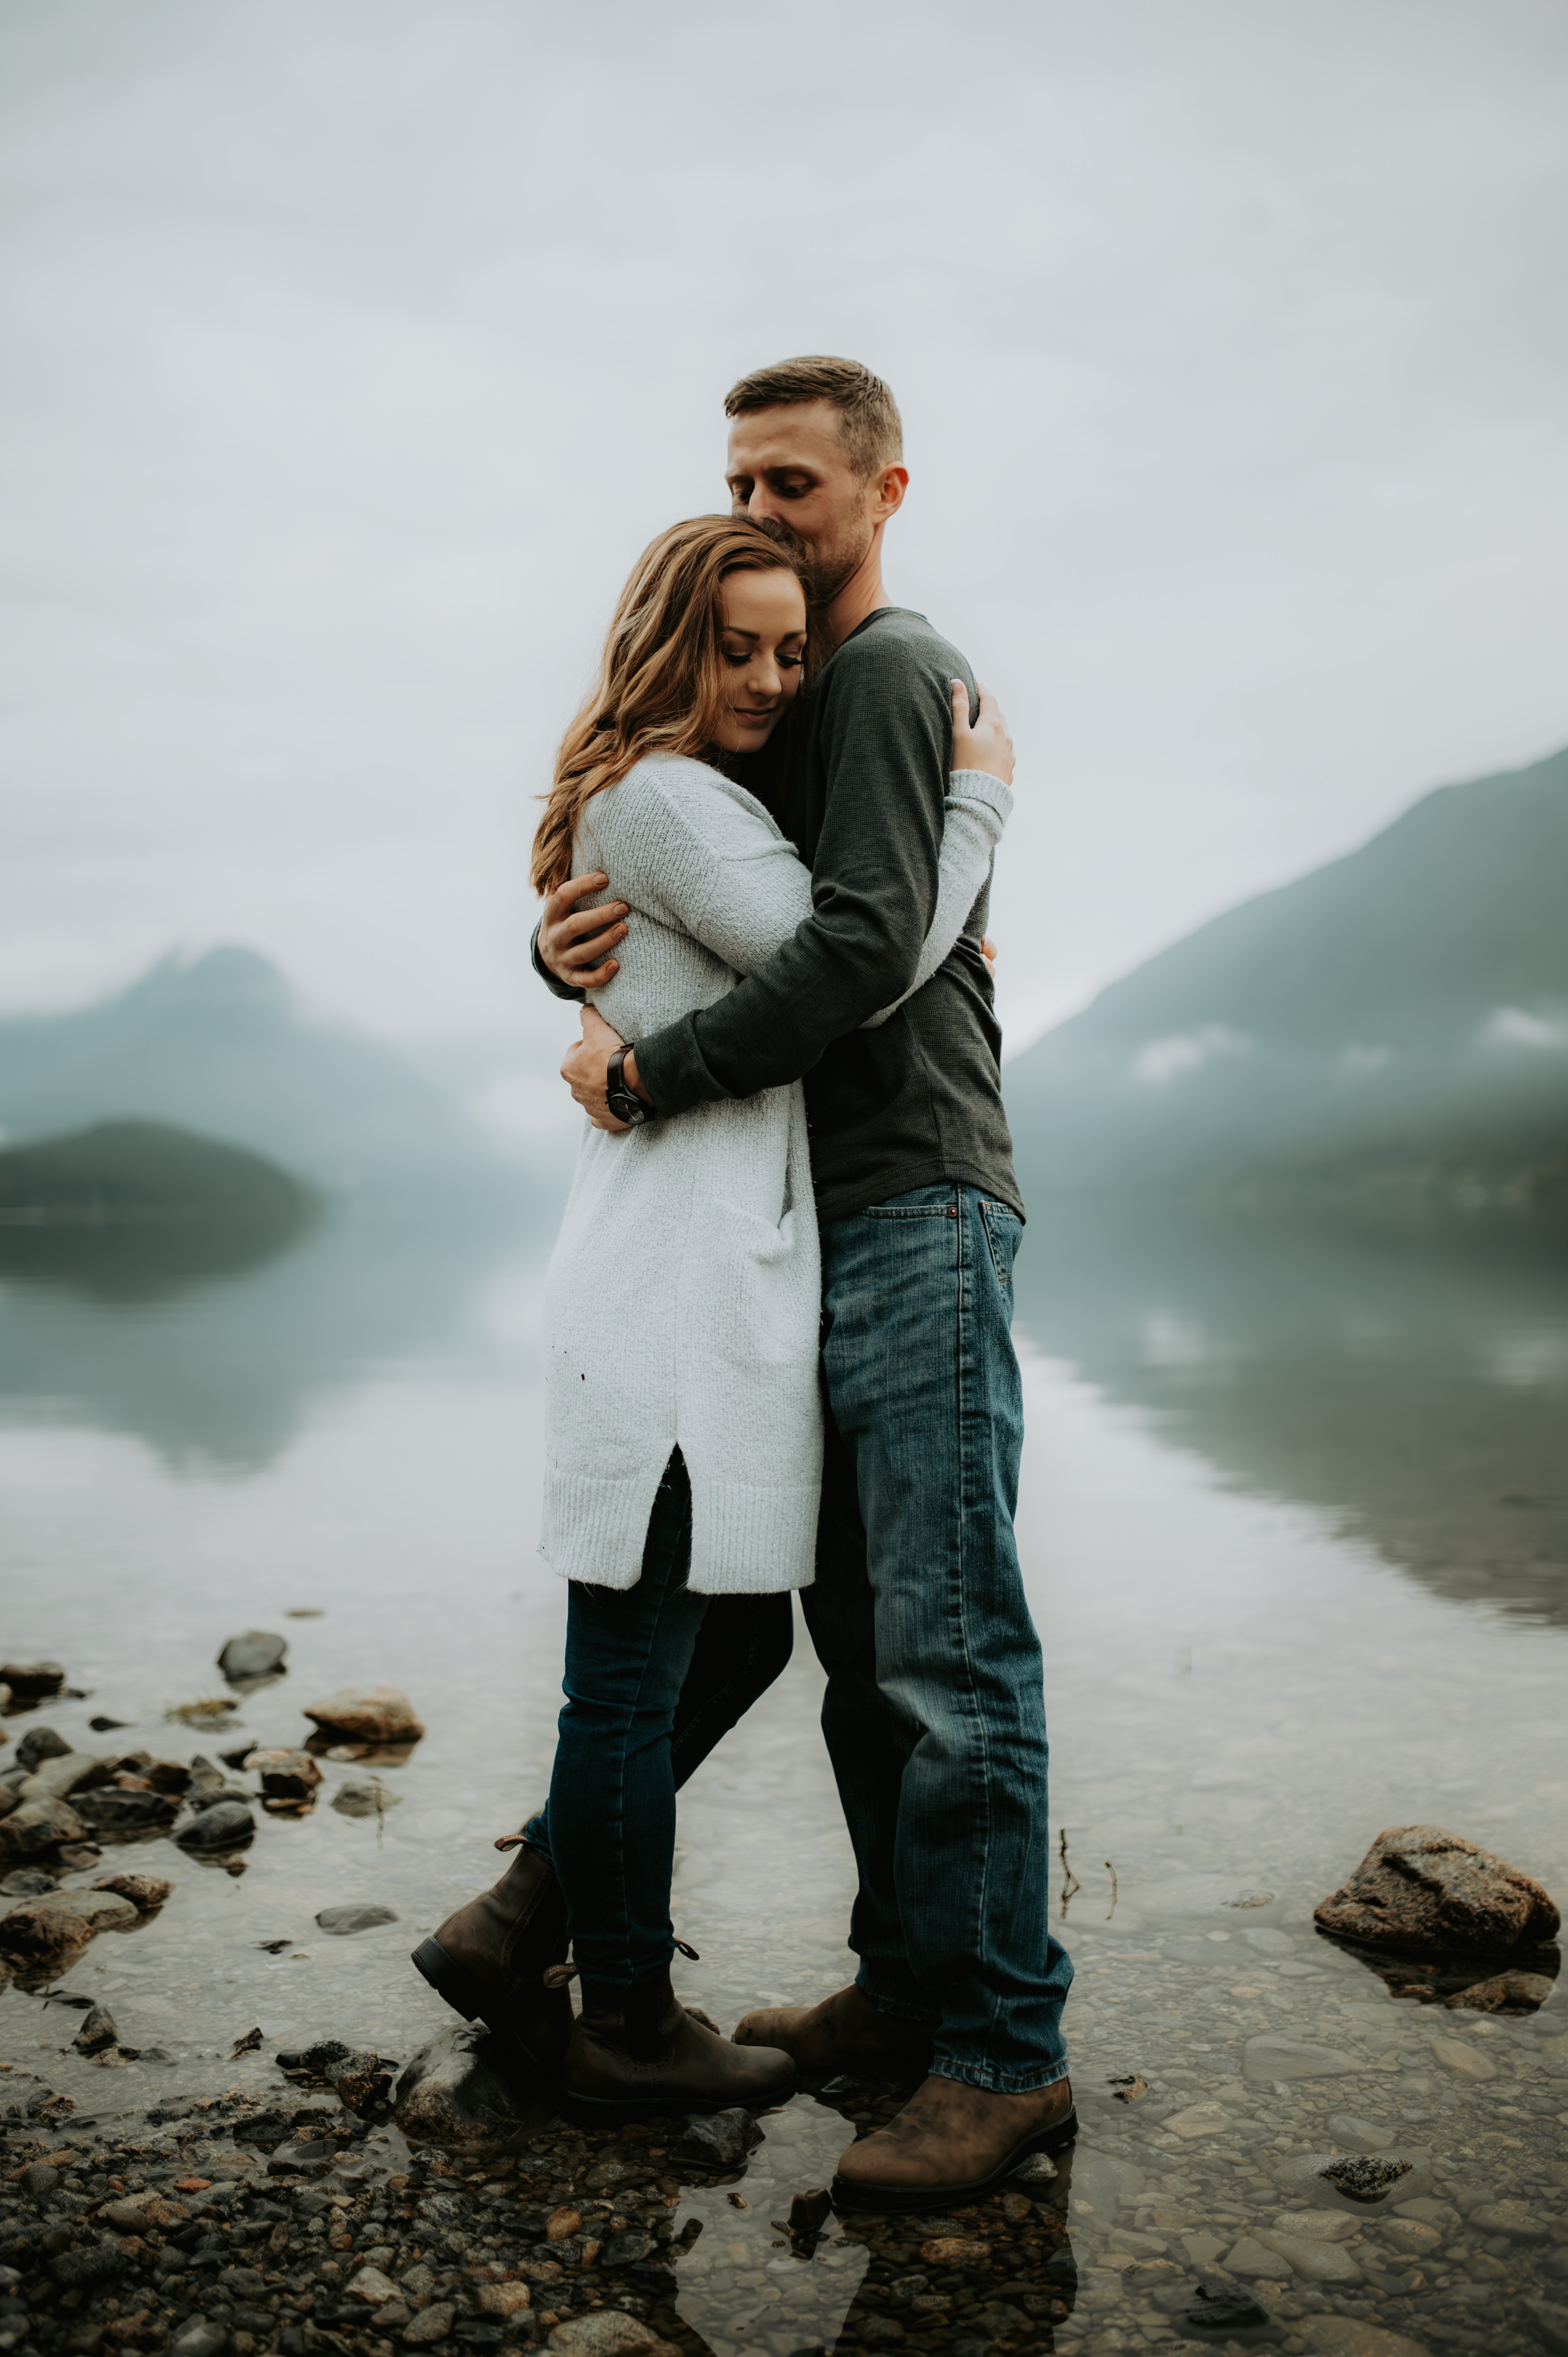 A Couple Standing on the Riverbank in a Mountain Valley. | Source: Pexels